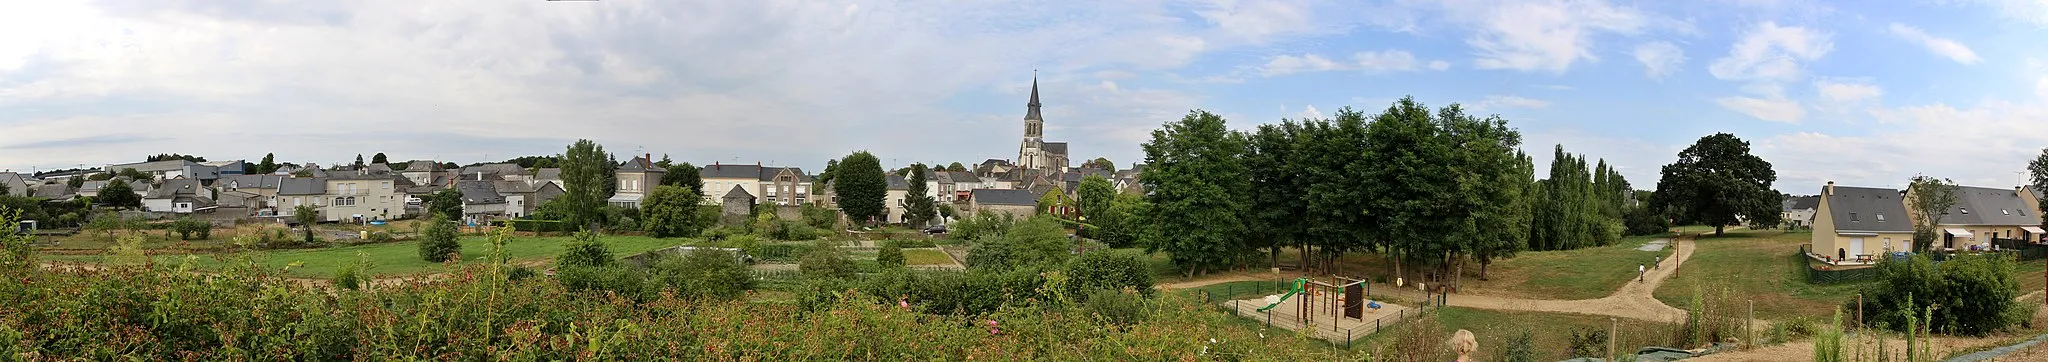 Photo showing: Panorama of la Membrolle sur Longuenée as seen from a park in the village. On the left, a part of the old town, build along the former road between Angers and Le Lion d'Angers, is visible. Most of the old houses are visible backside, with their large vegetable gardens, a common feature in this town. On the right side, after trees hiding another part of the old town, a part of the recently built Domaine des chênes neighbourhood, is visible. in the background, completely on the left, the old "Bouvet" doors and windows factory is visible. A new, larger, factory was build one kilomoter away.